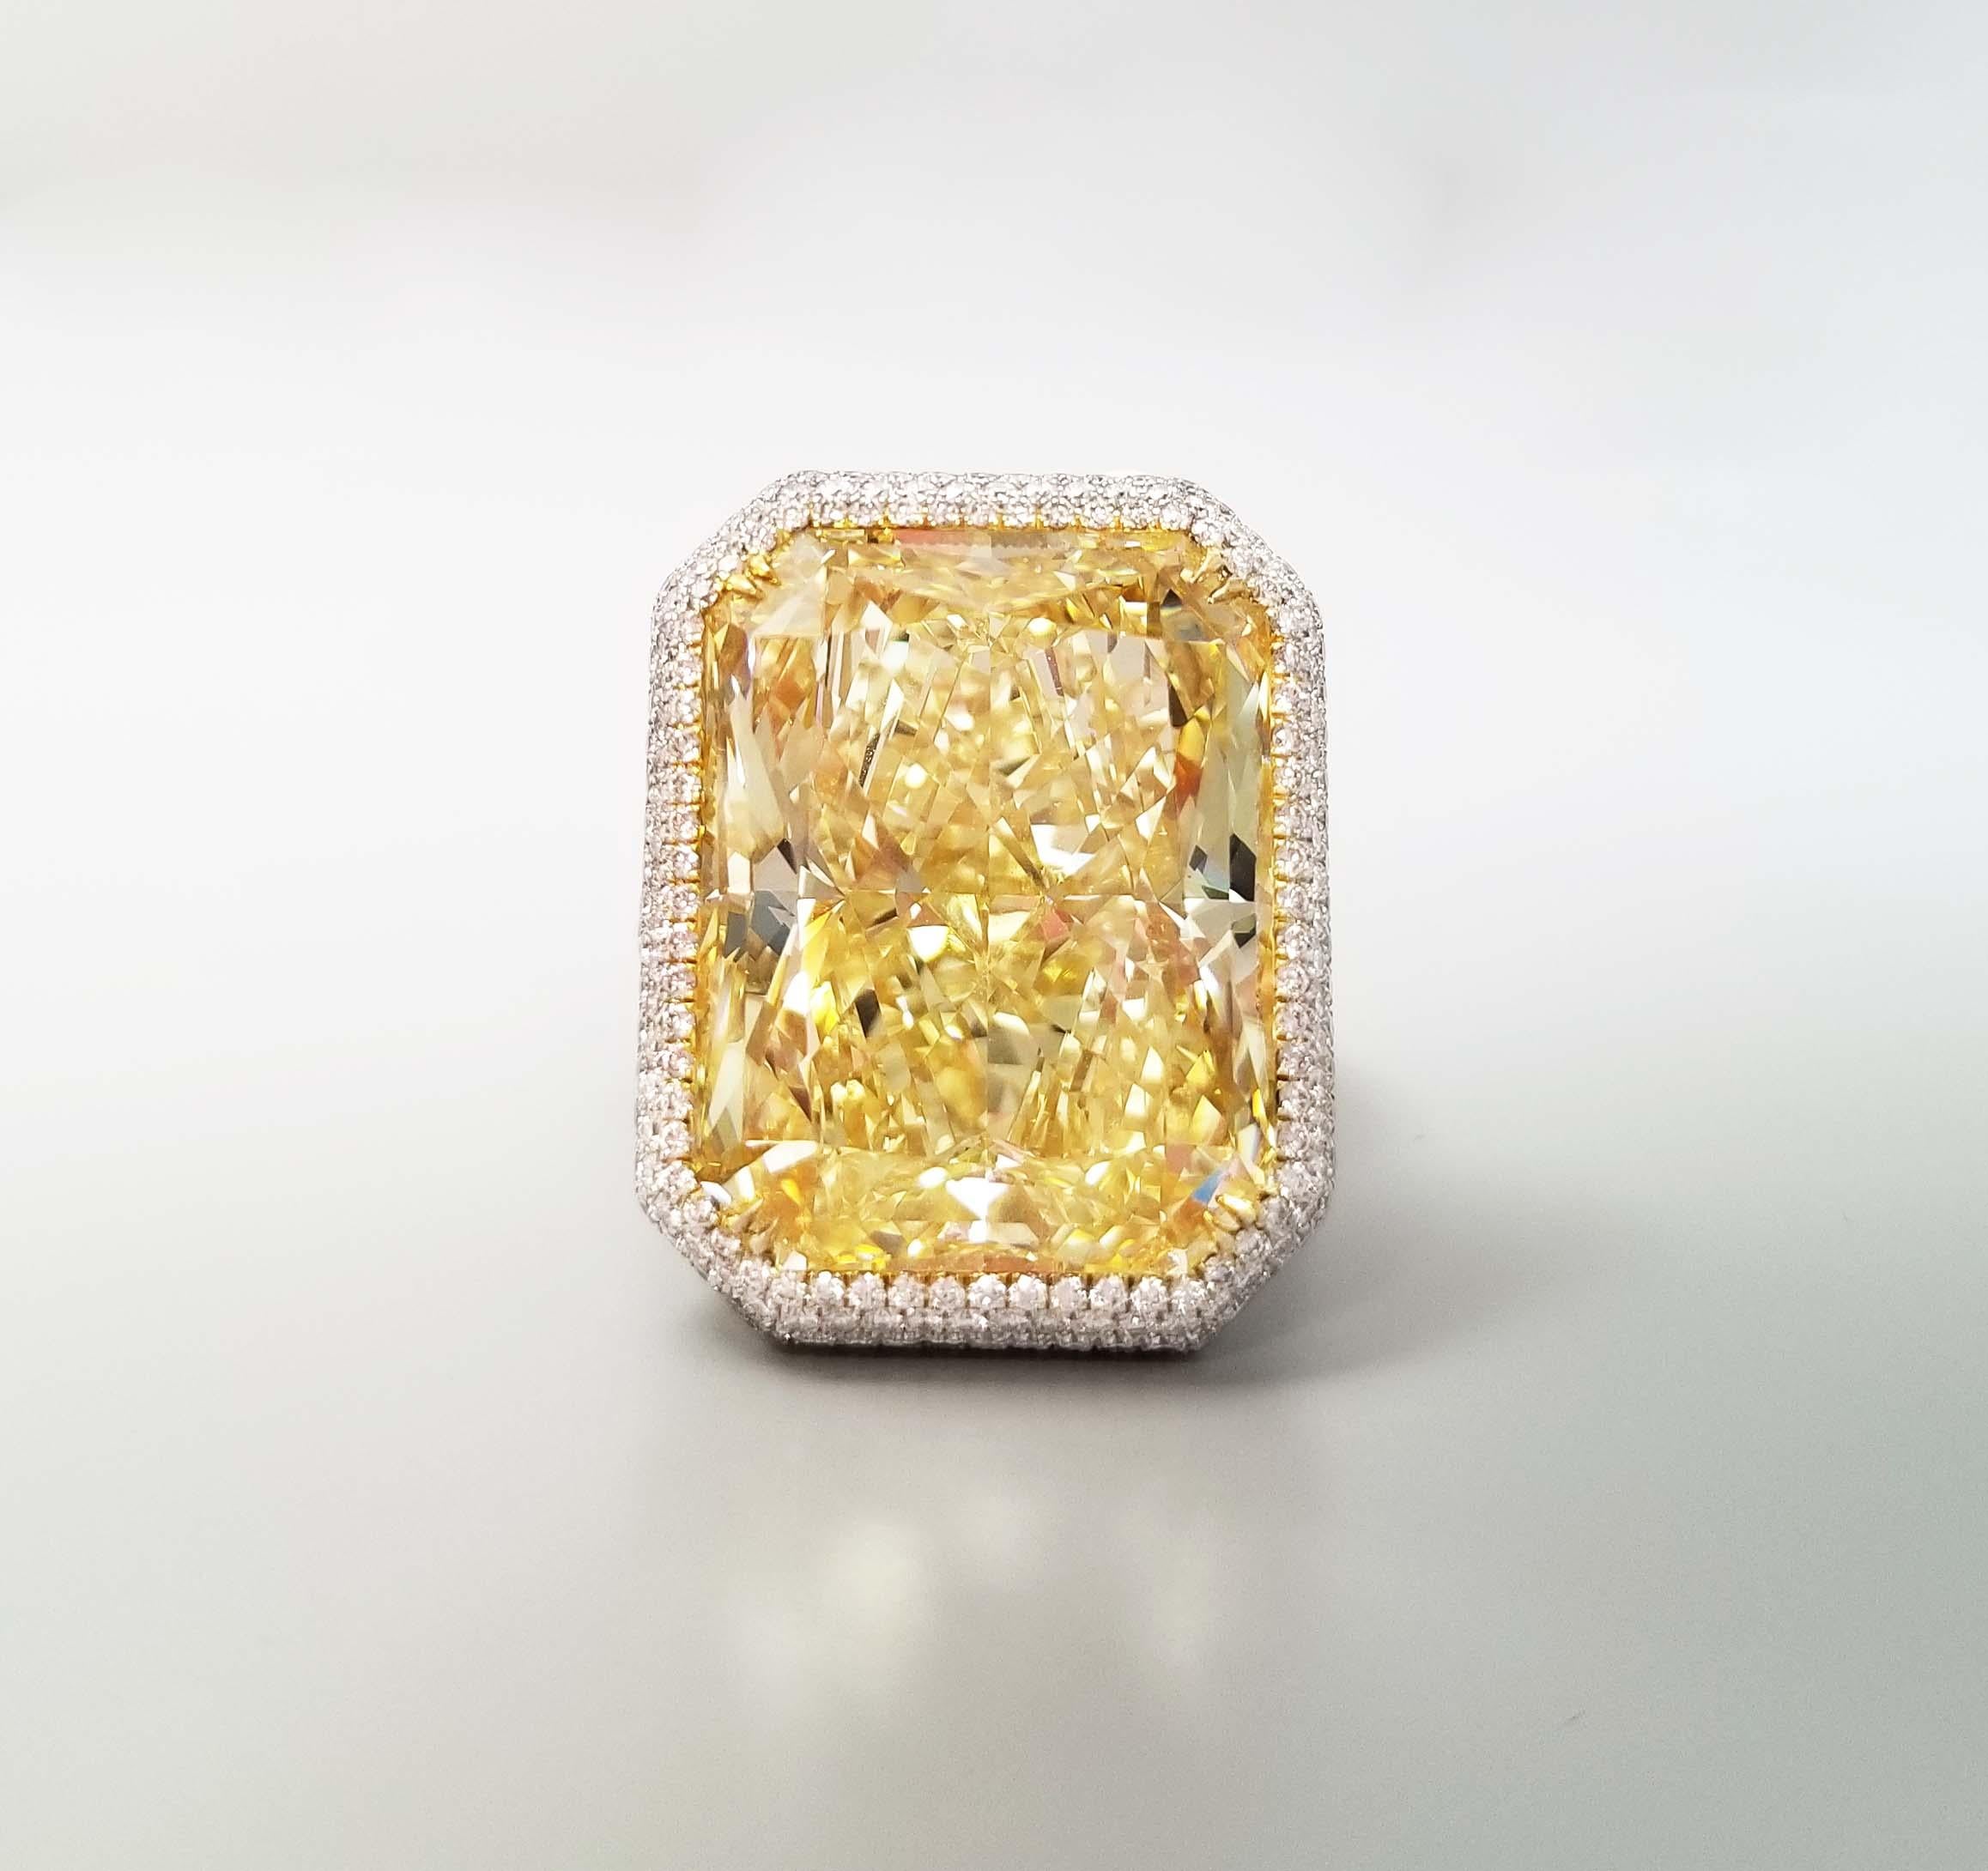 Scarselli 31 Carat Natural Fancy Yellow Diamond Ring VS1 Clarity in Platinum GIA For Sale 1